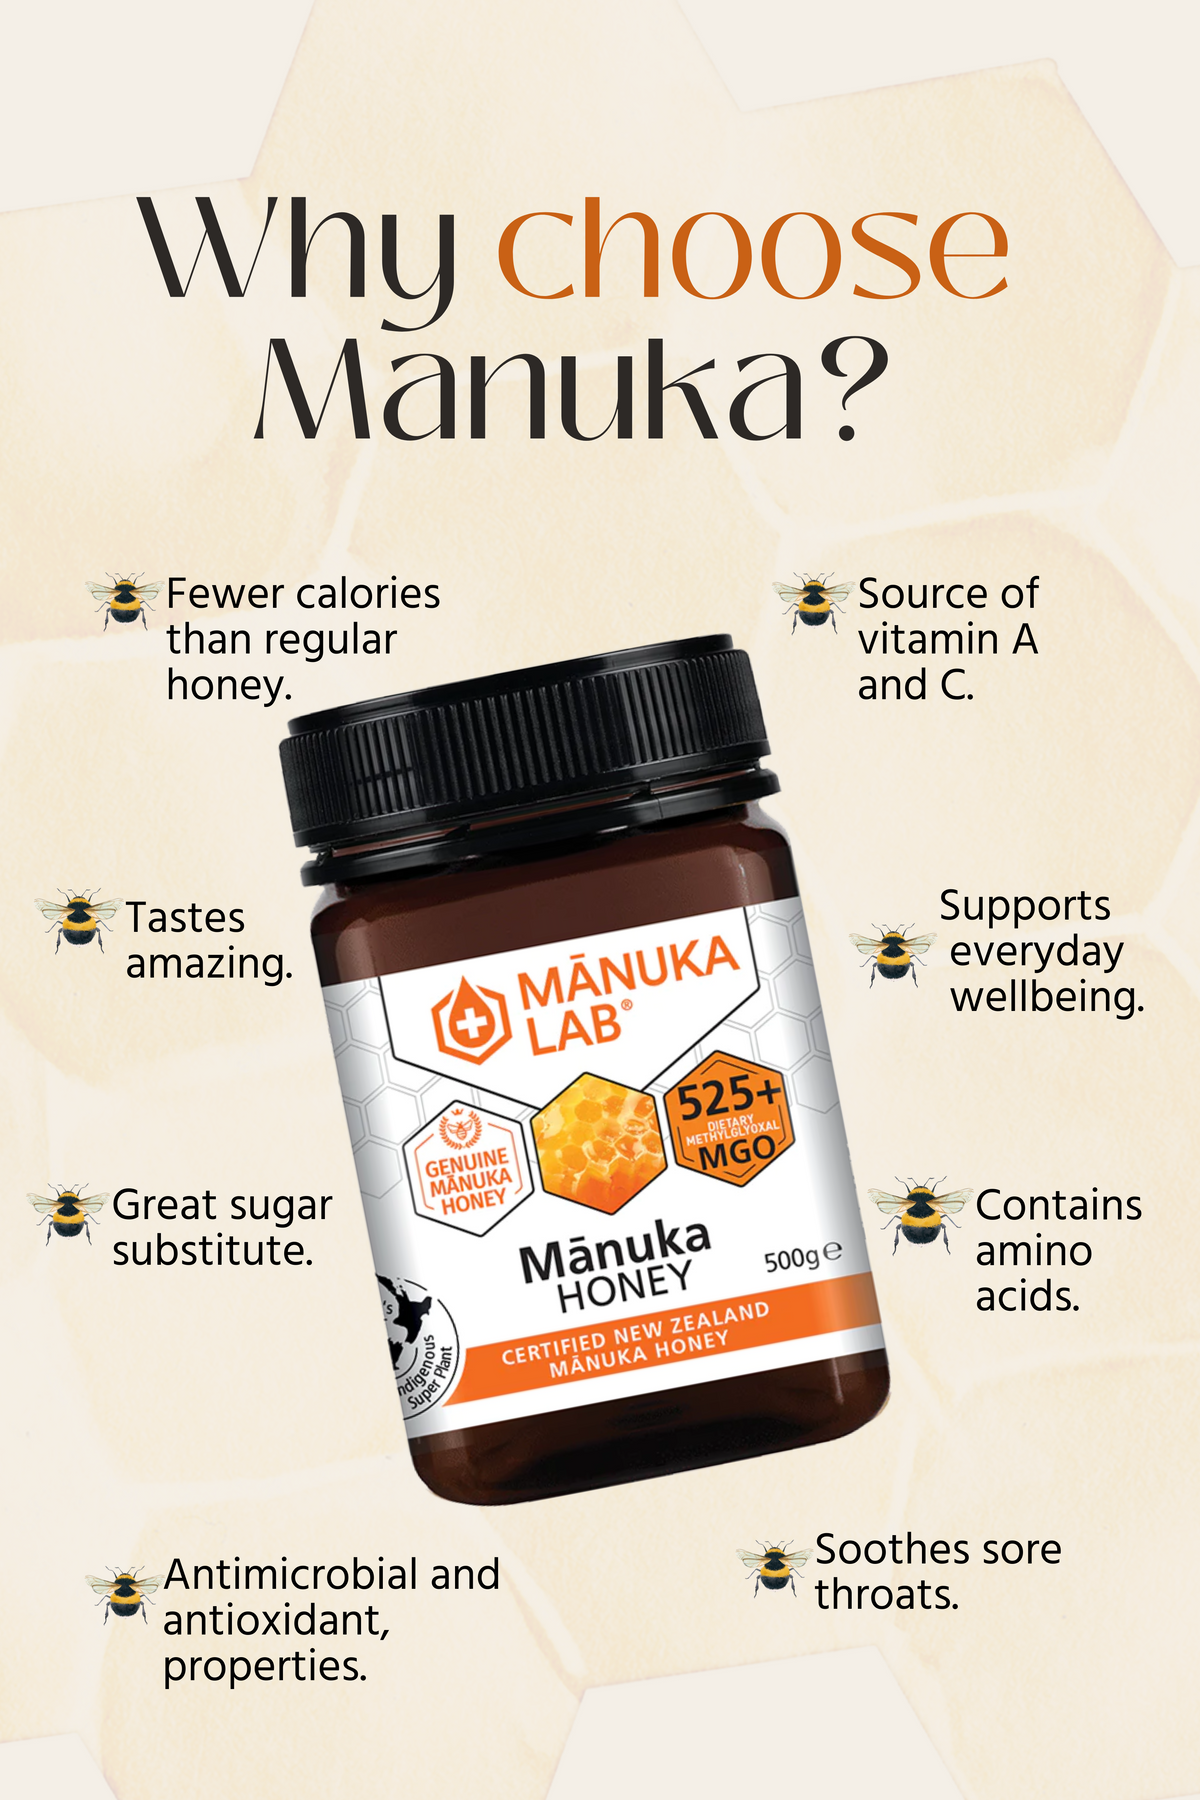 Gift Your Kids With The Immunity Of Manuka Honey This Halloween